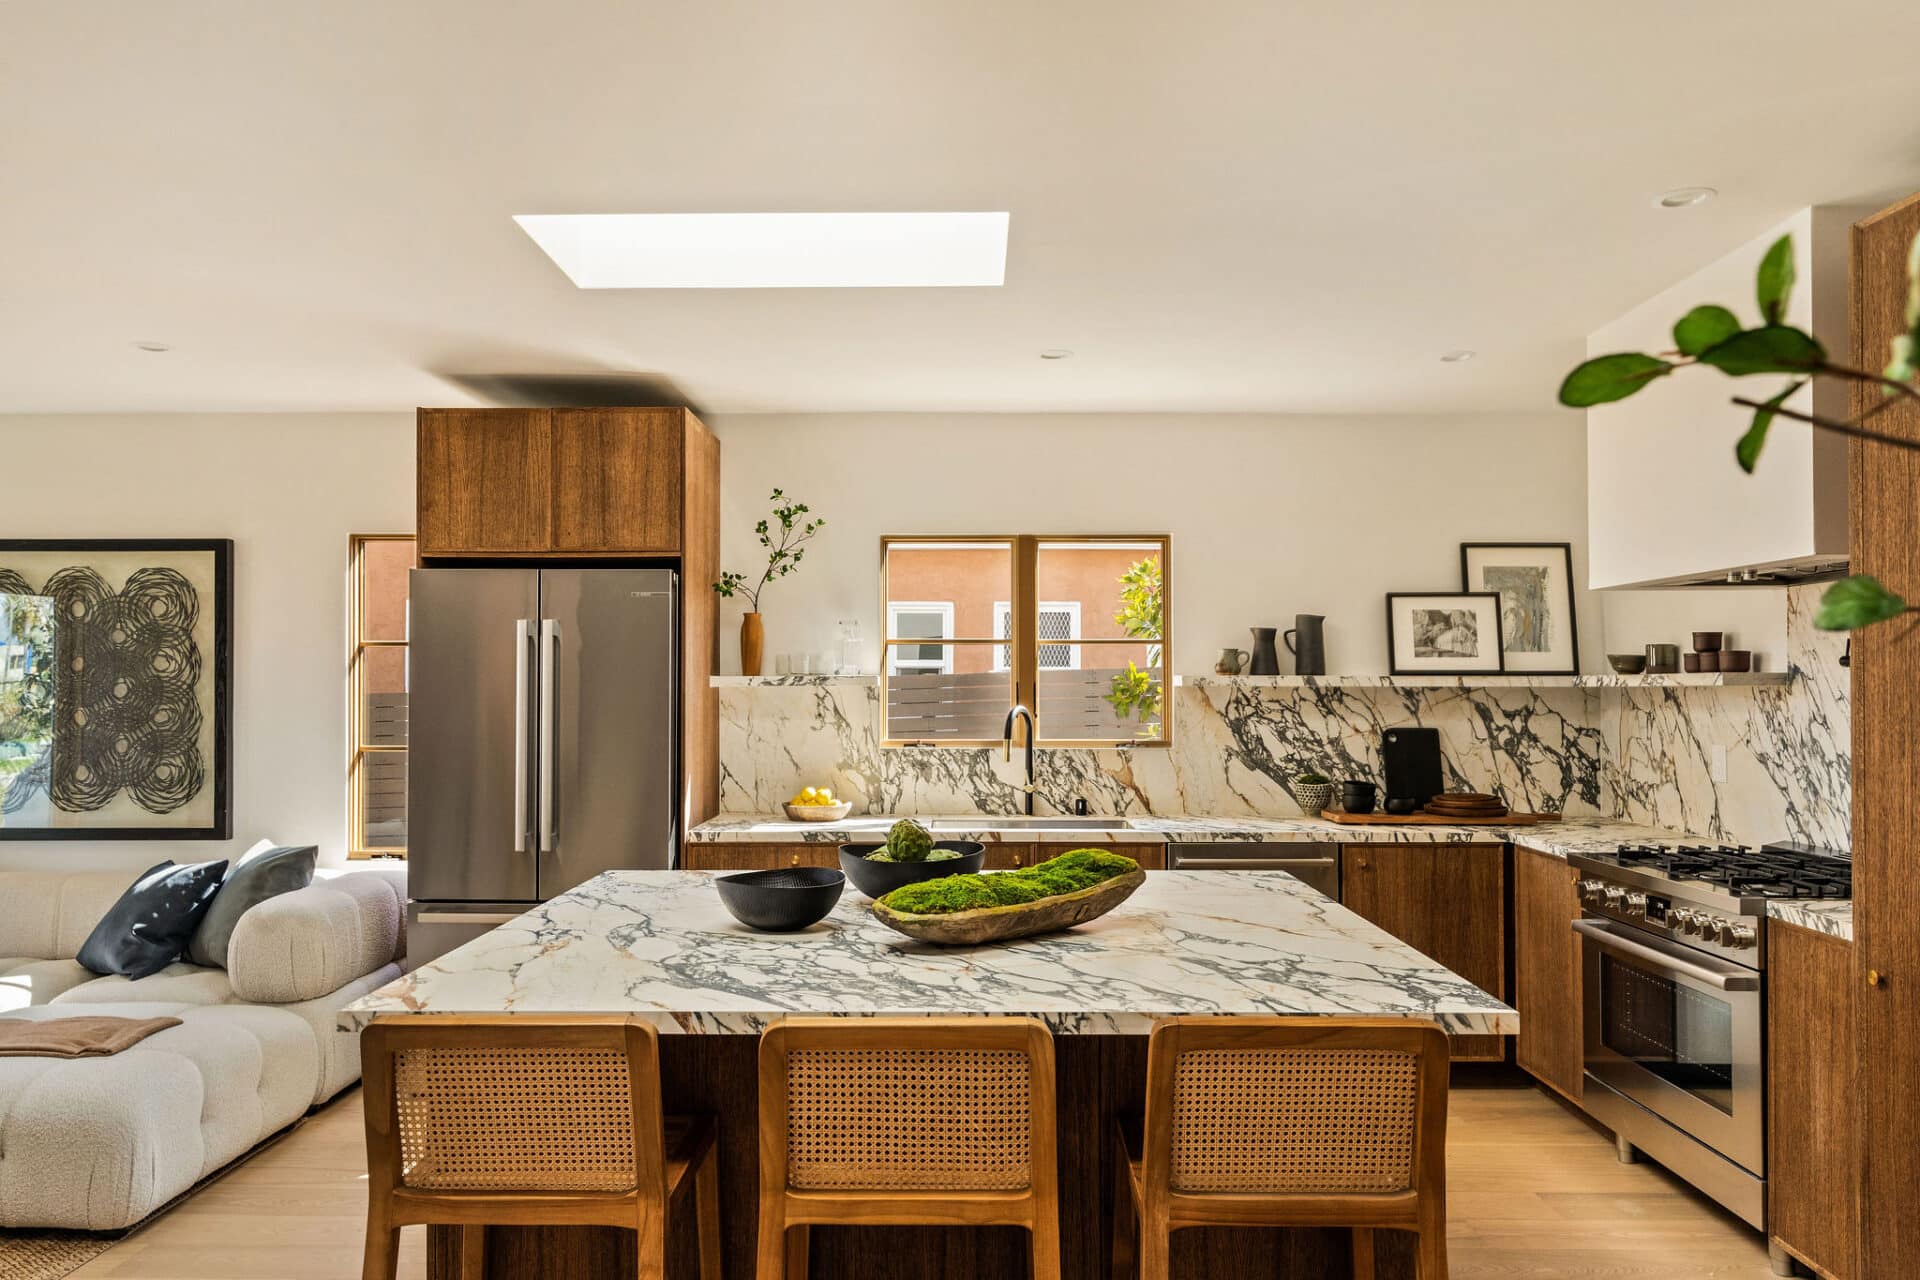 View of the kitchen featuring marble countertop, backsplash and shelf.